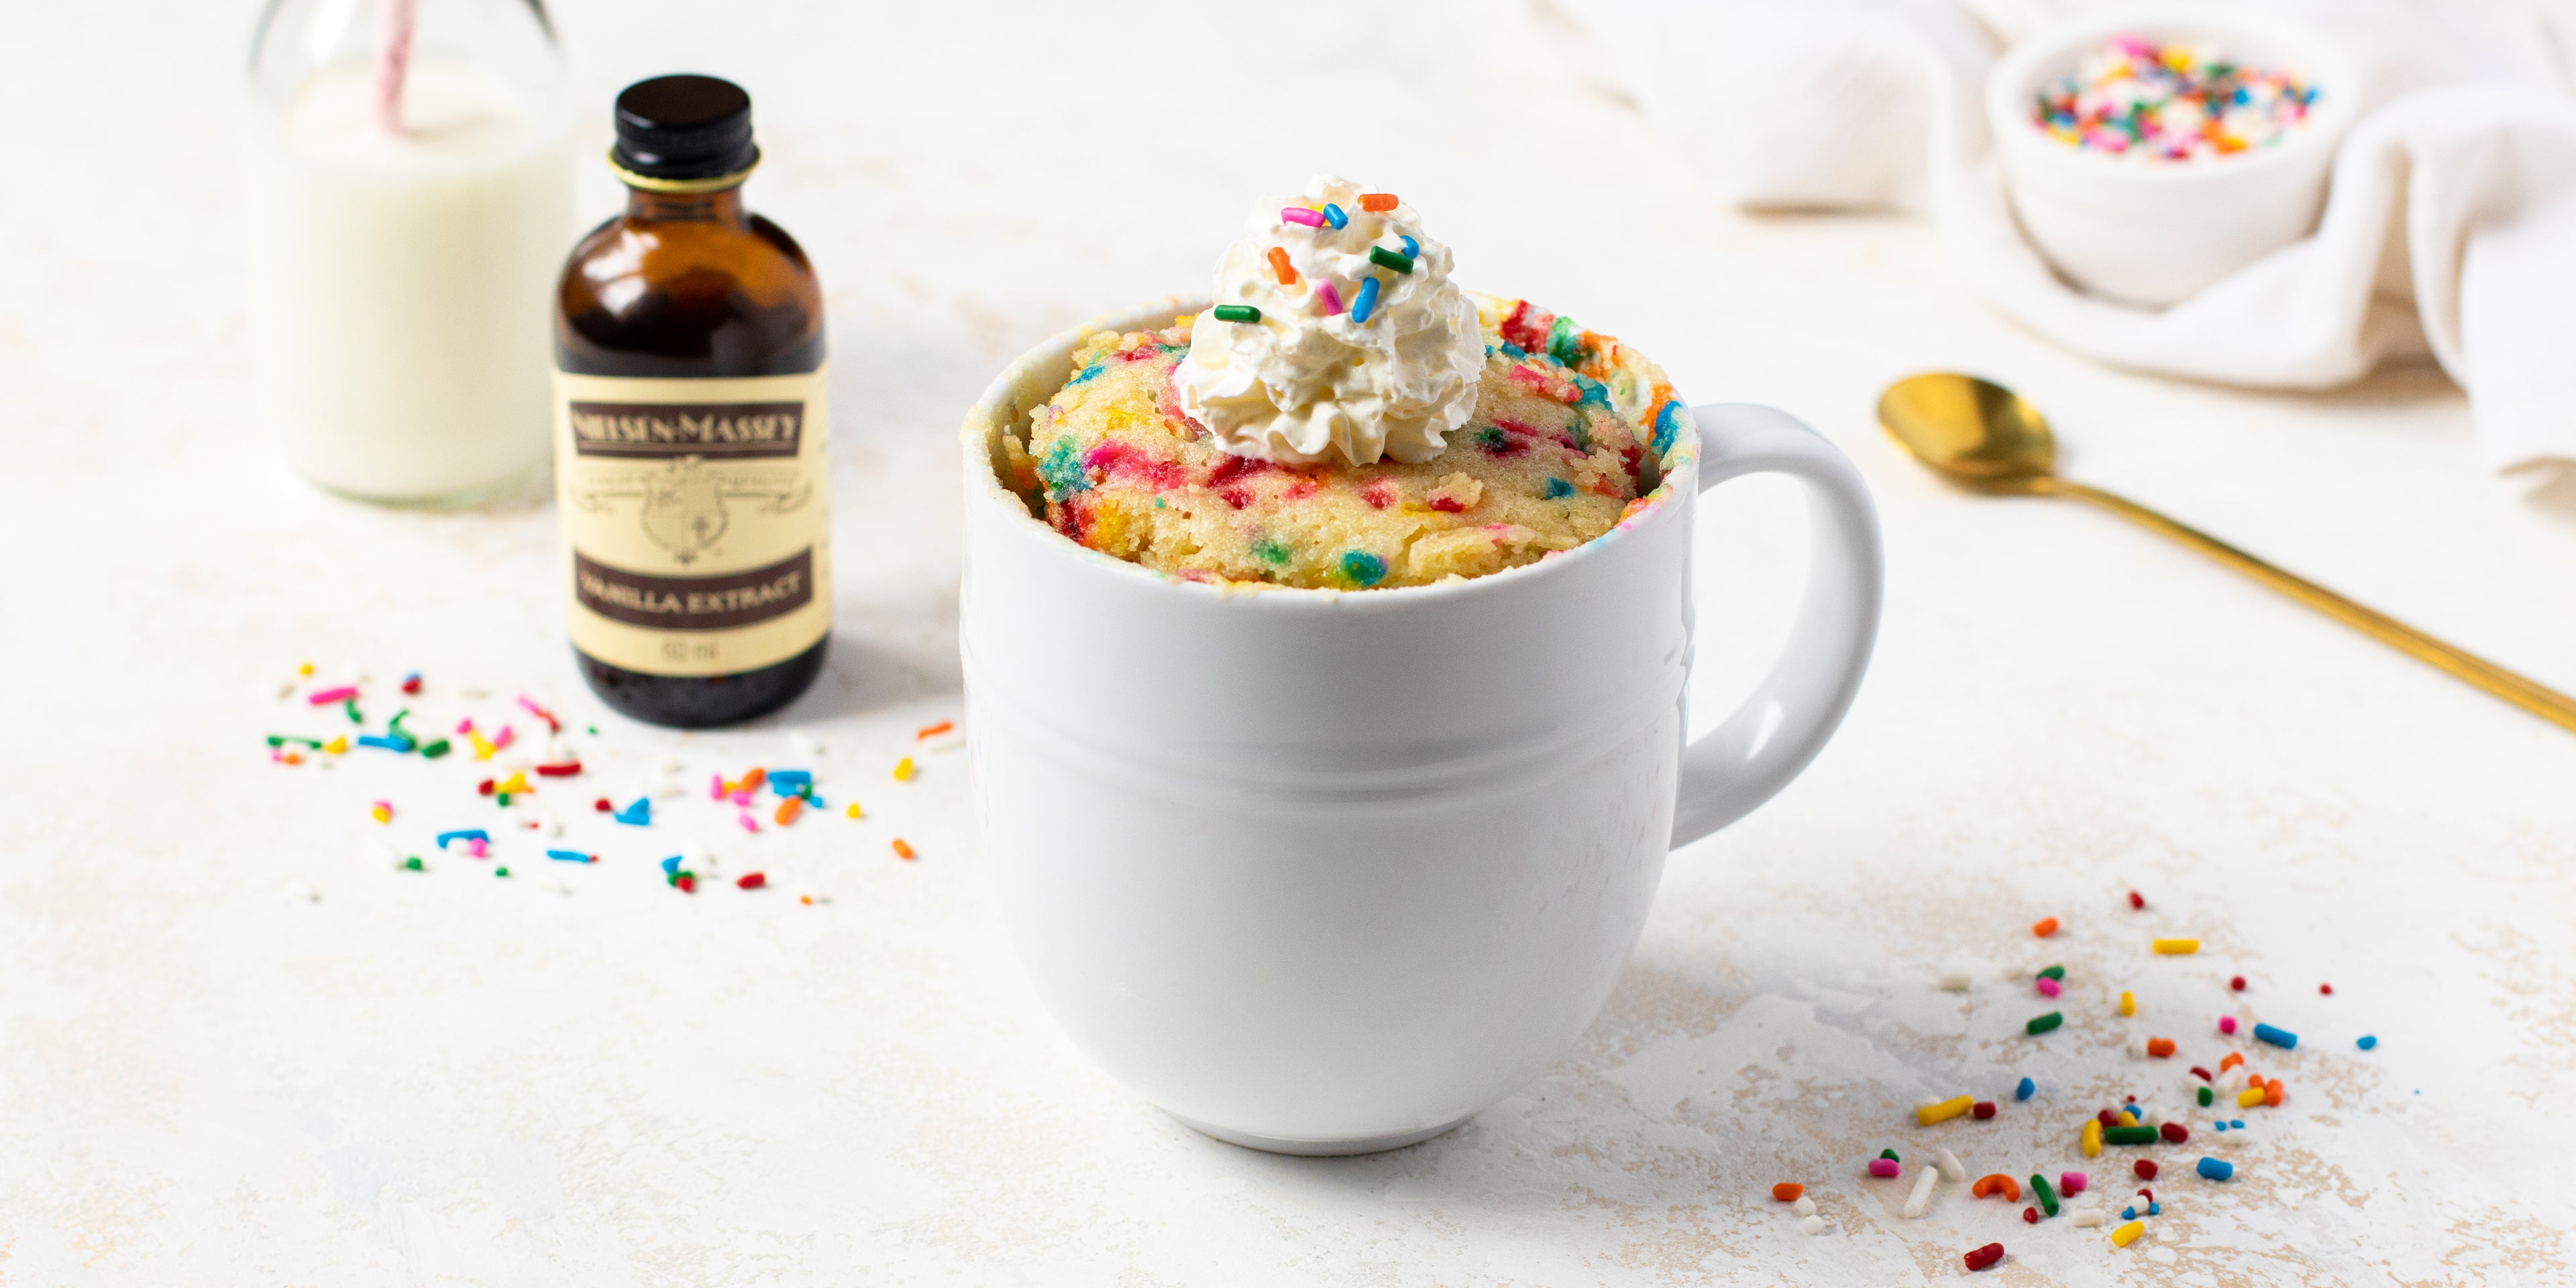 Birthday Cake Mug Cake with a dollop of whipped cream on top with sprinkles, and a bottle of Nielsen-Massey Vanilla extract in the background